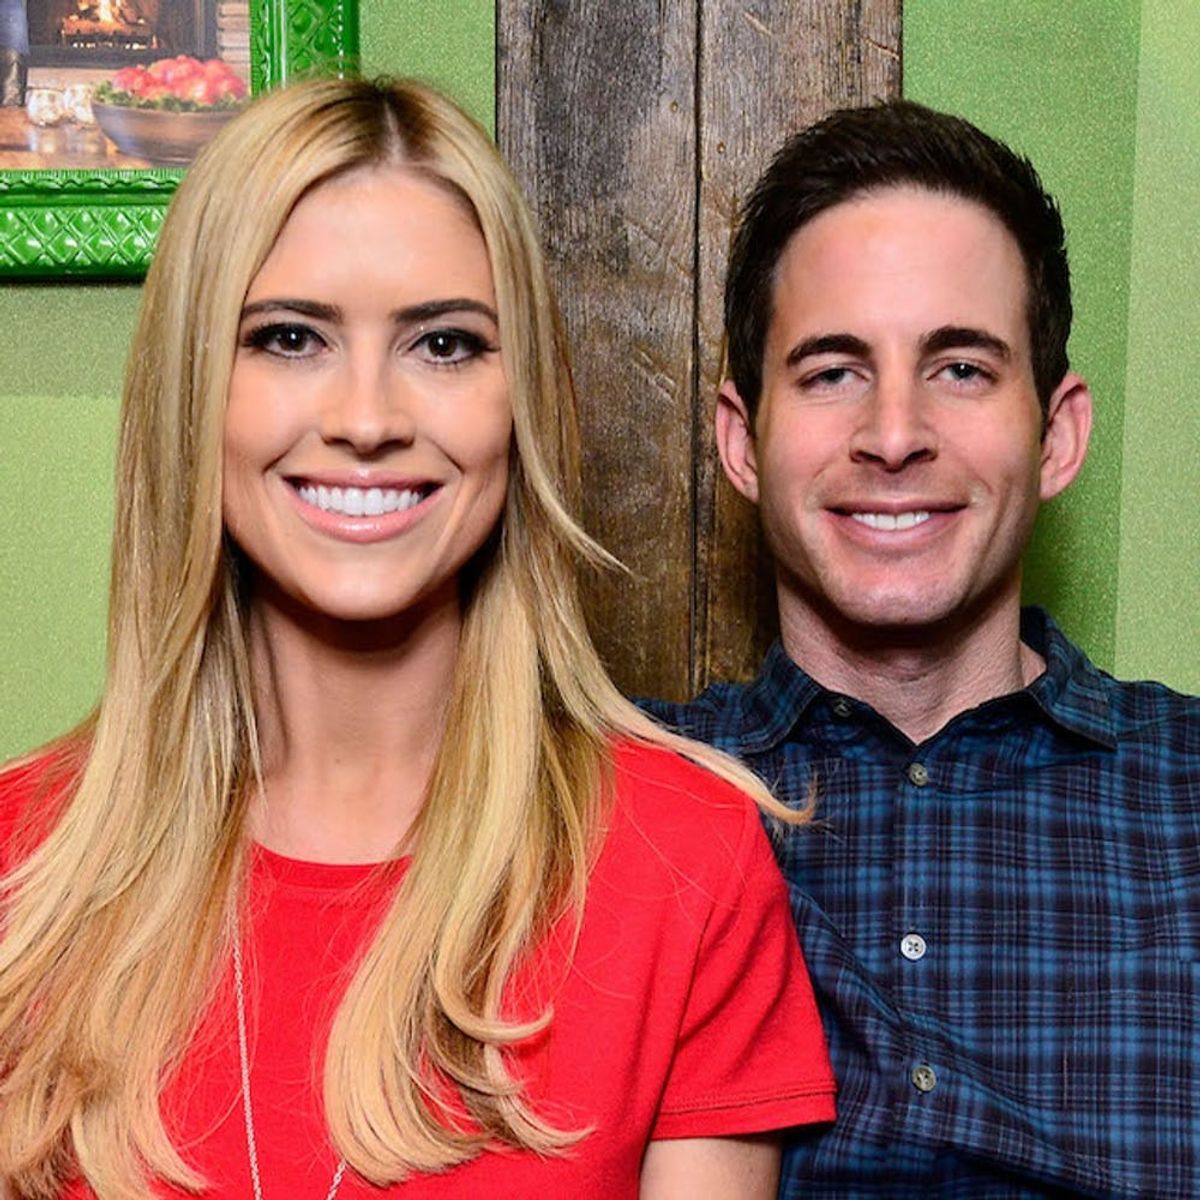 How Flip or Flop’s Tarek and Christina El Moussa Are Moving on After Their Public Breakup